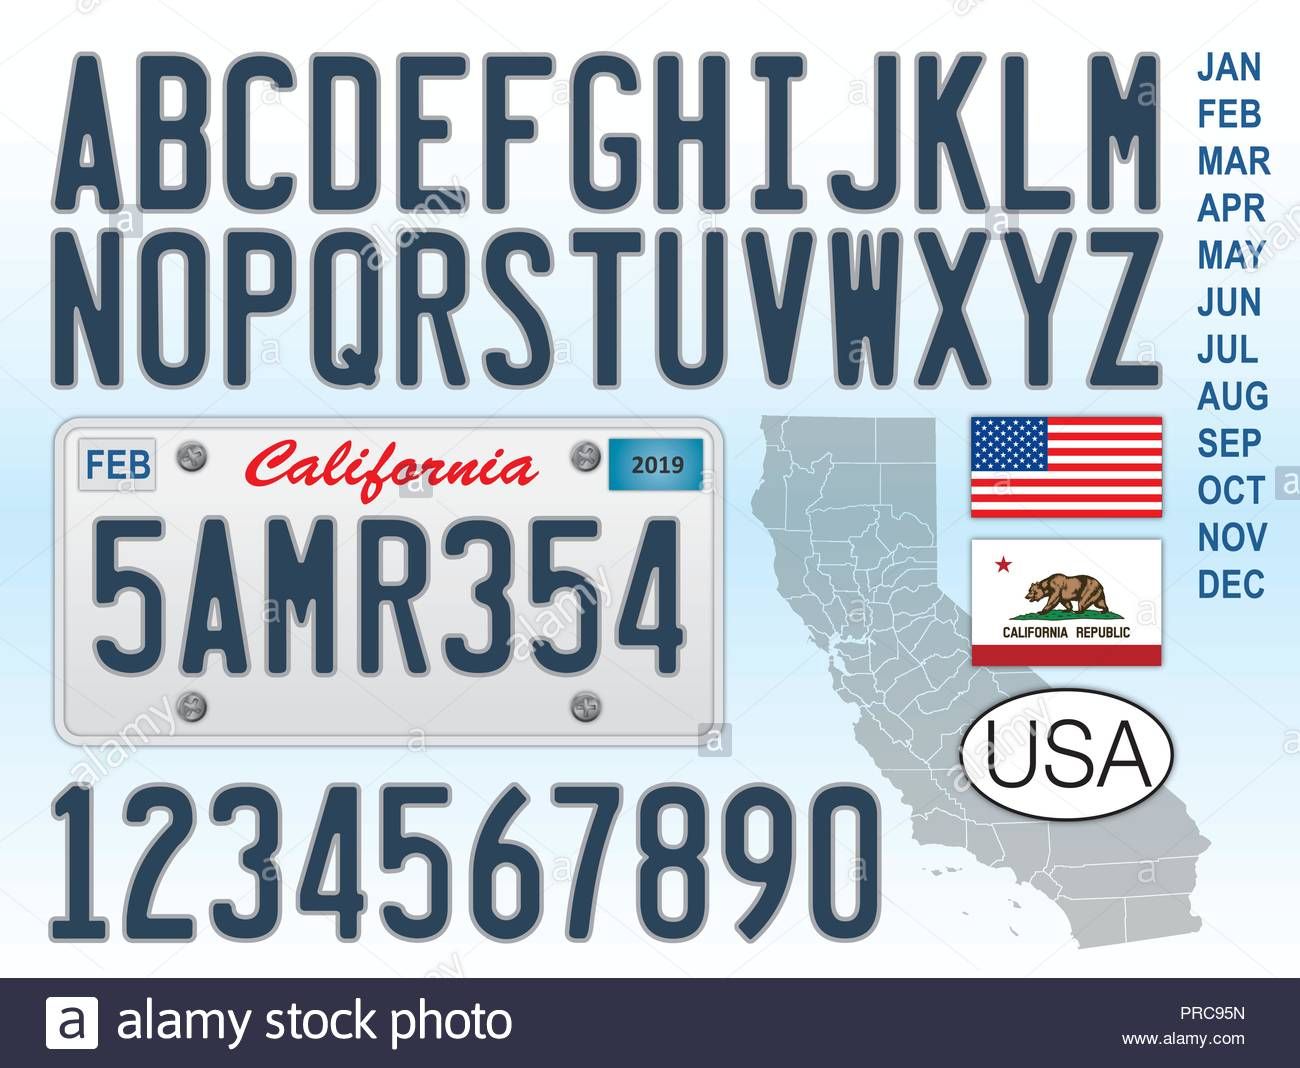 California License Plate Font Type